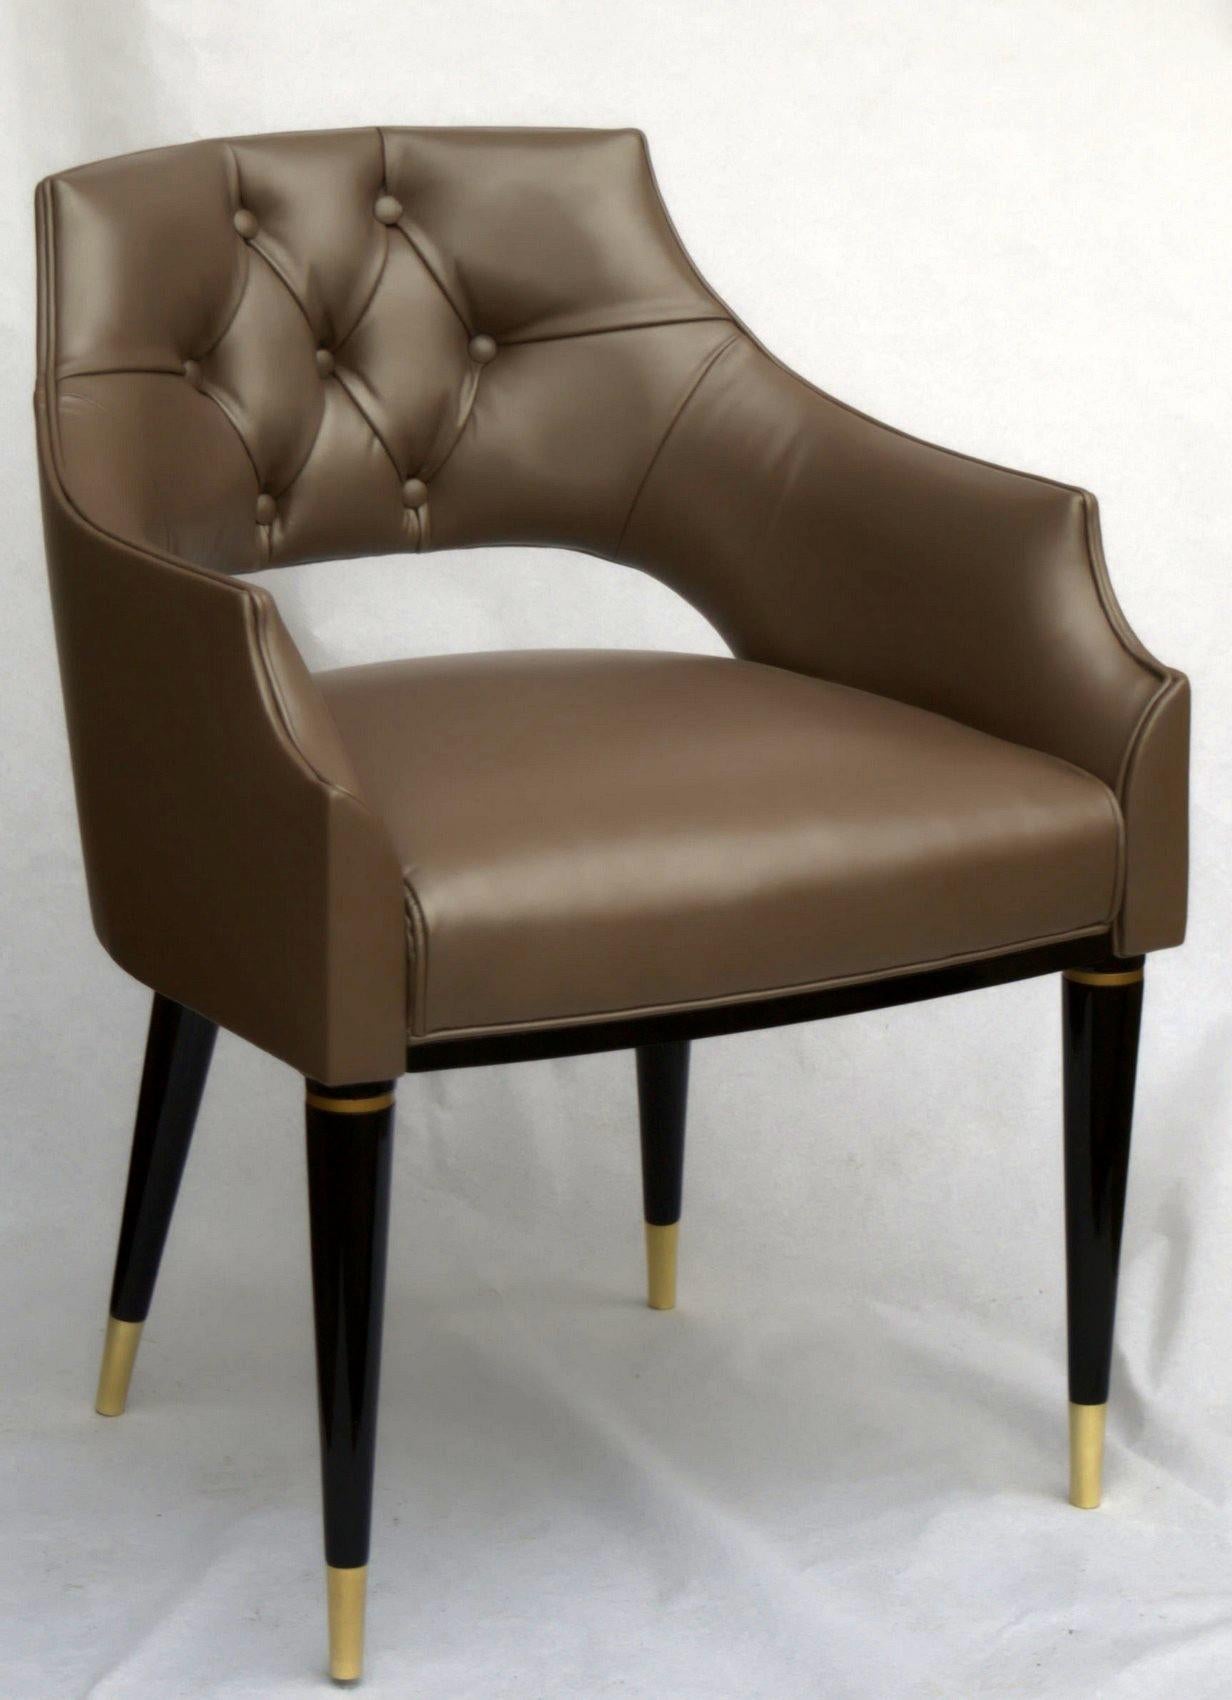 Dining Armchair, Tufted Fiore Italian Leather, Midcentury Style, Luxury Details 2